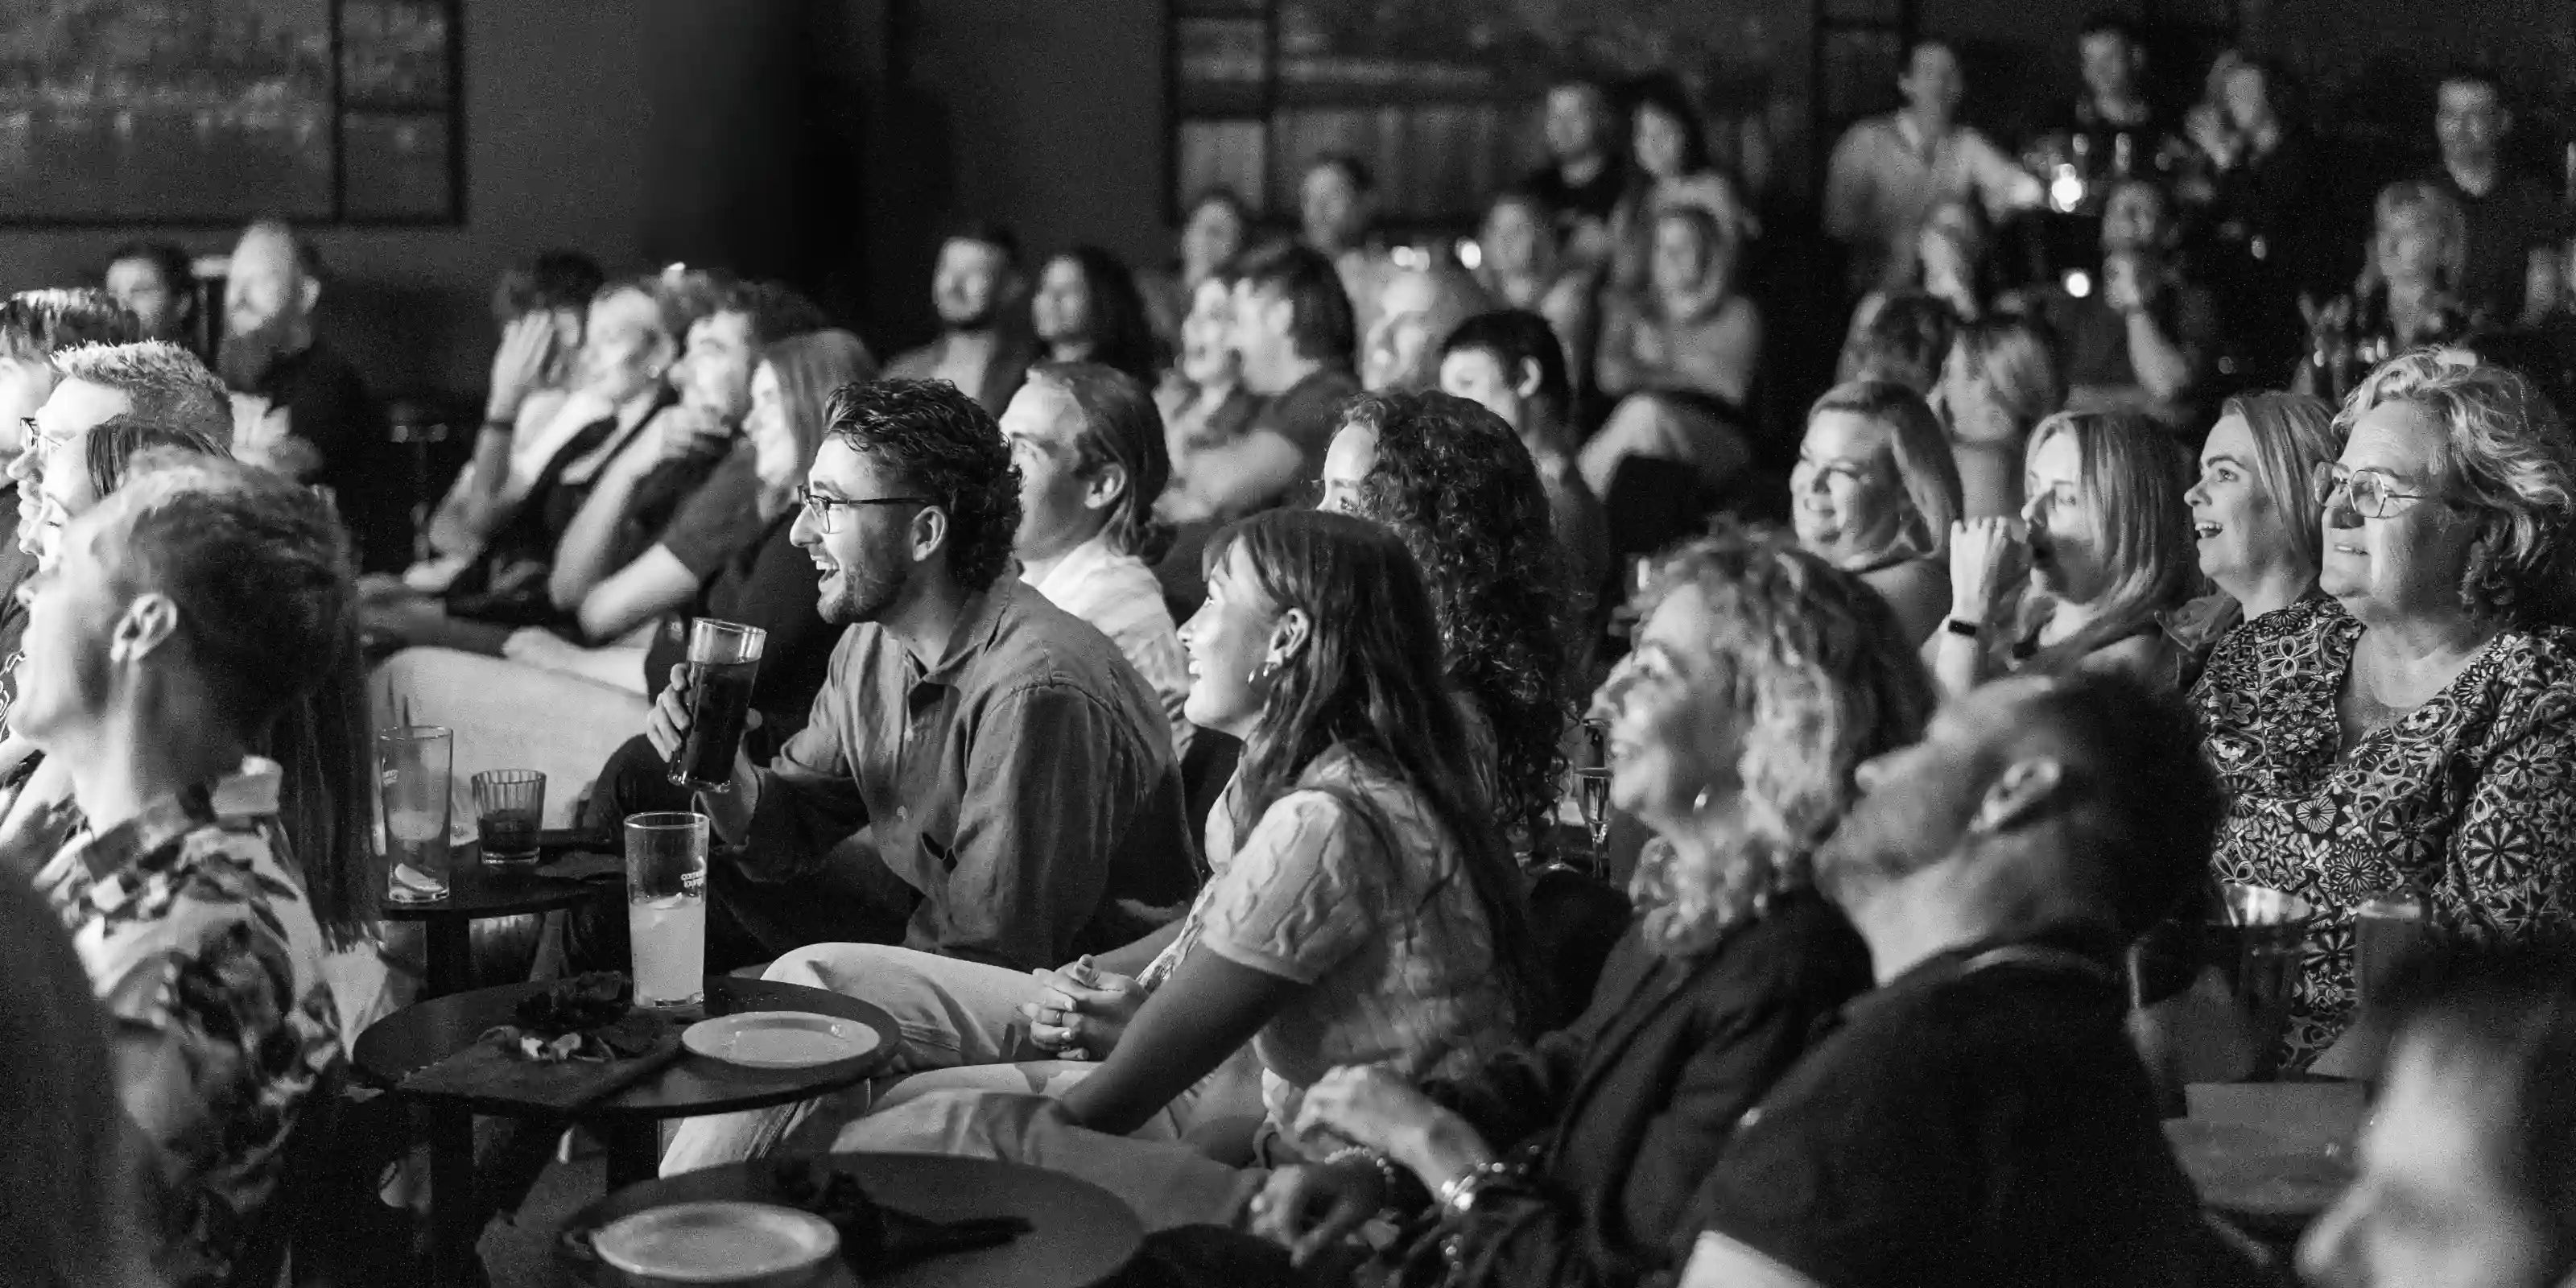 audience laughing during comedy show in perth at Comedy Lounge